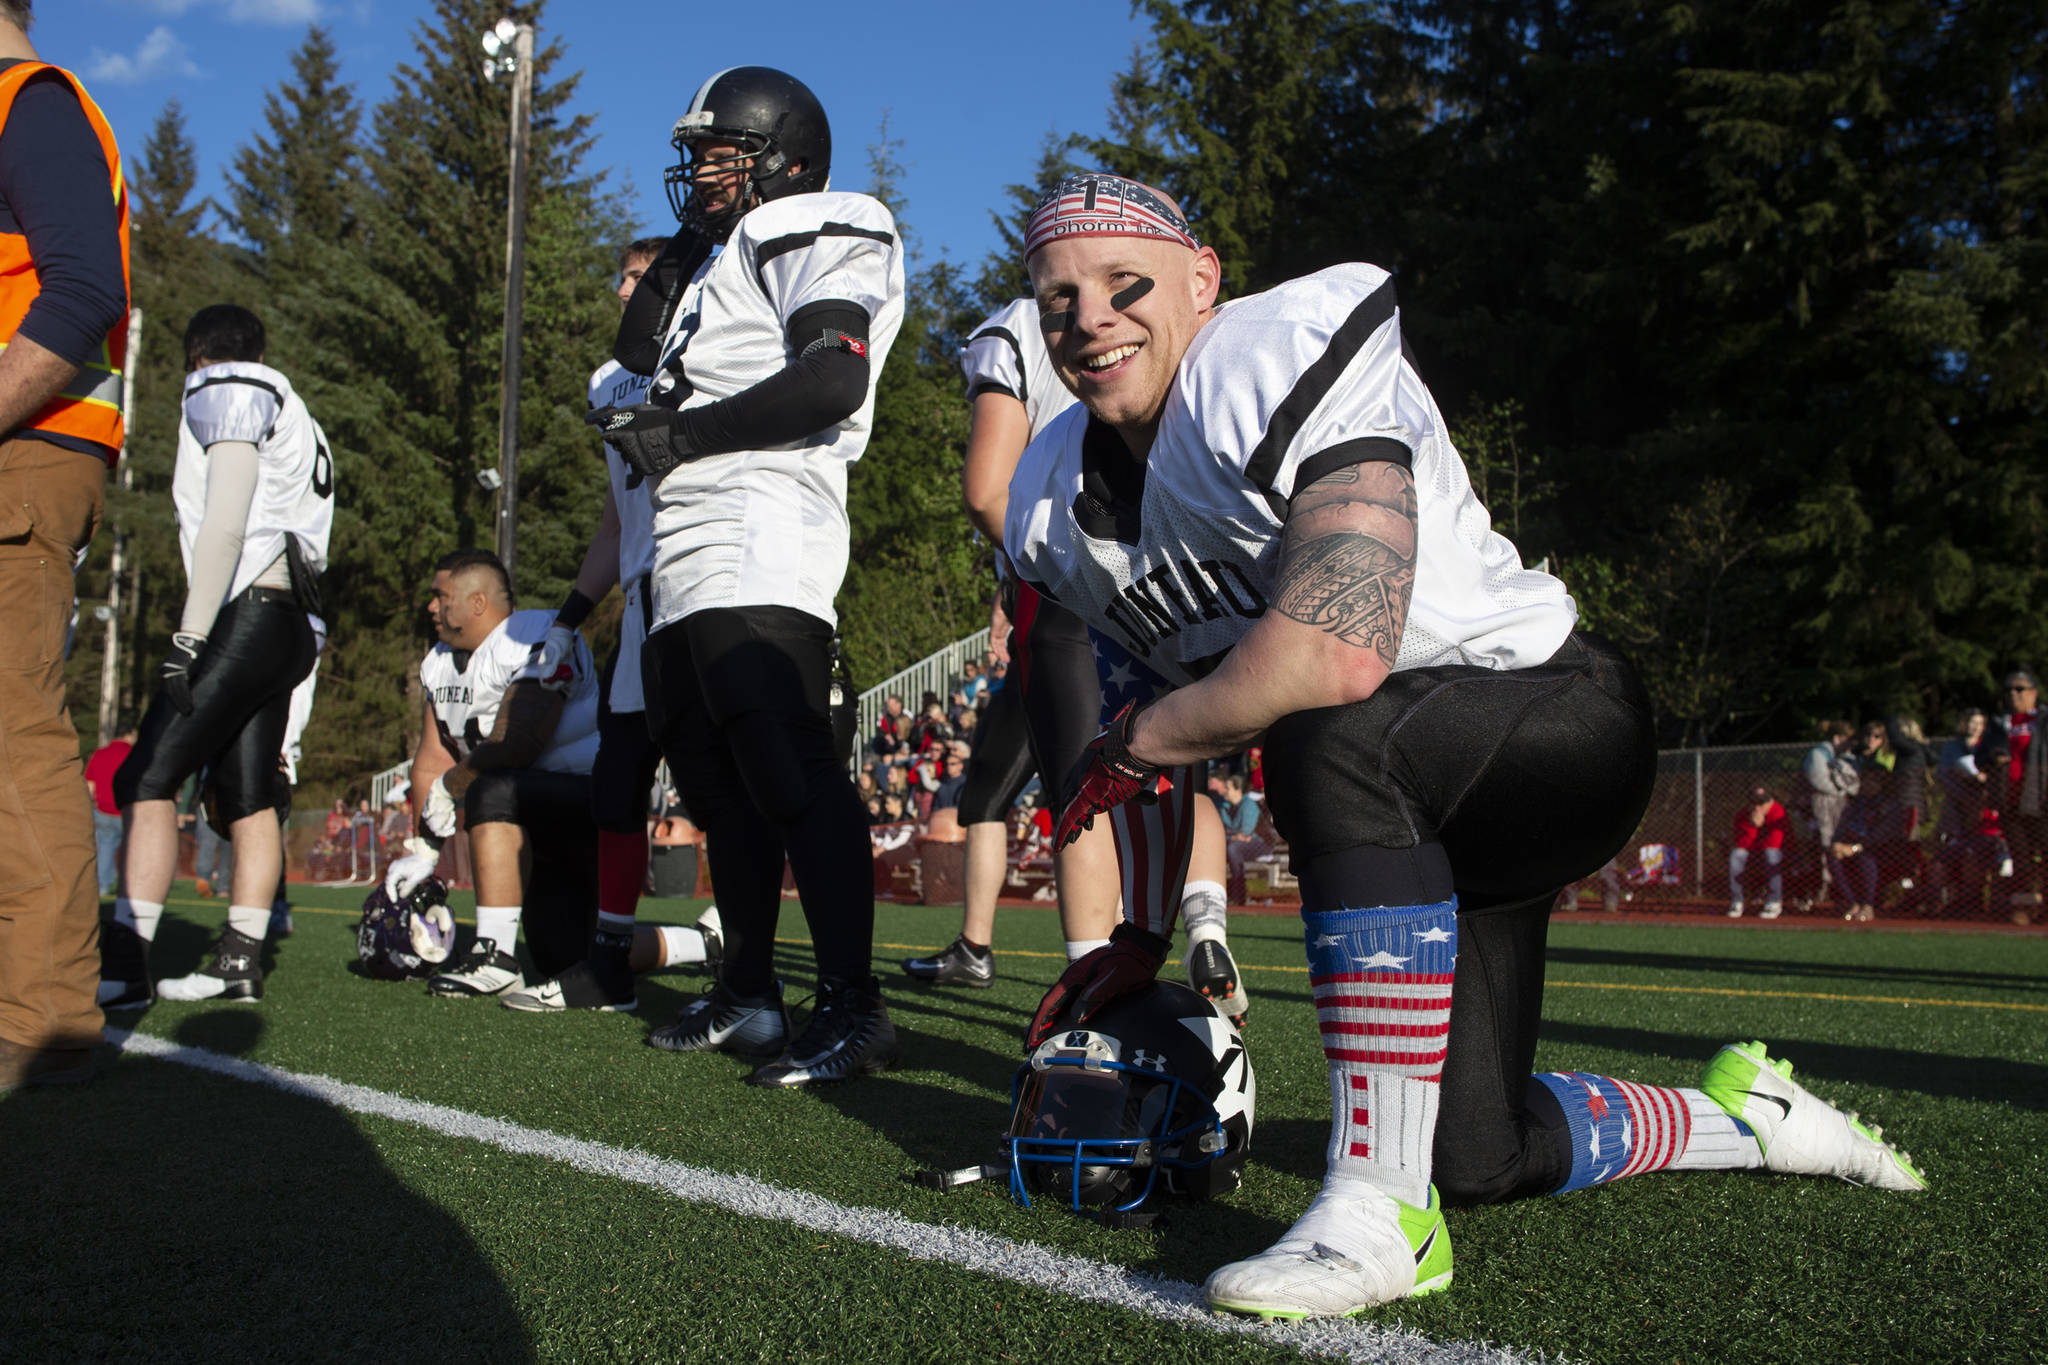 Stars’ player Mike Wright kneels during the Juneau Alumni Football Game at Adair-Kennedy Memorial Field on Friday, May 24, 2019. (Michael Penn | Juneau Empire)